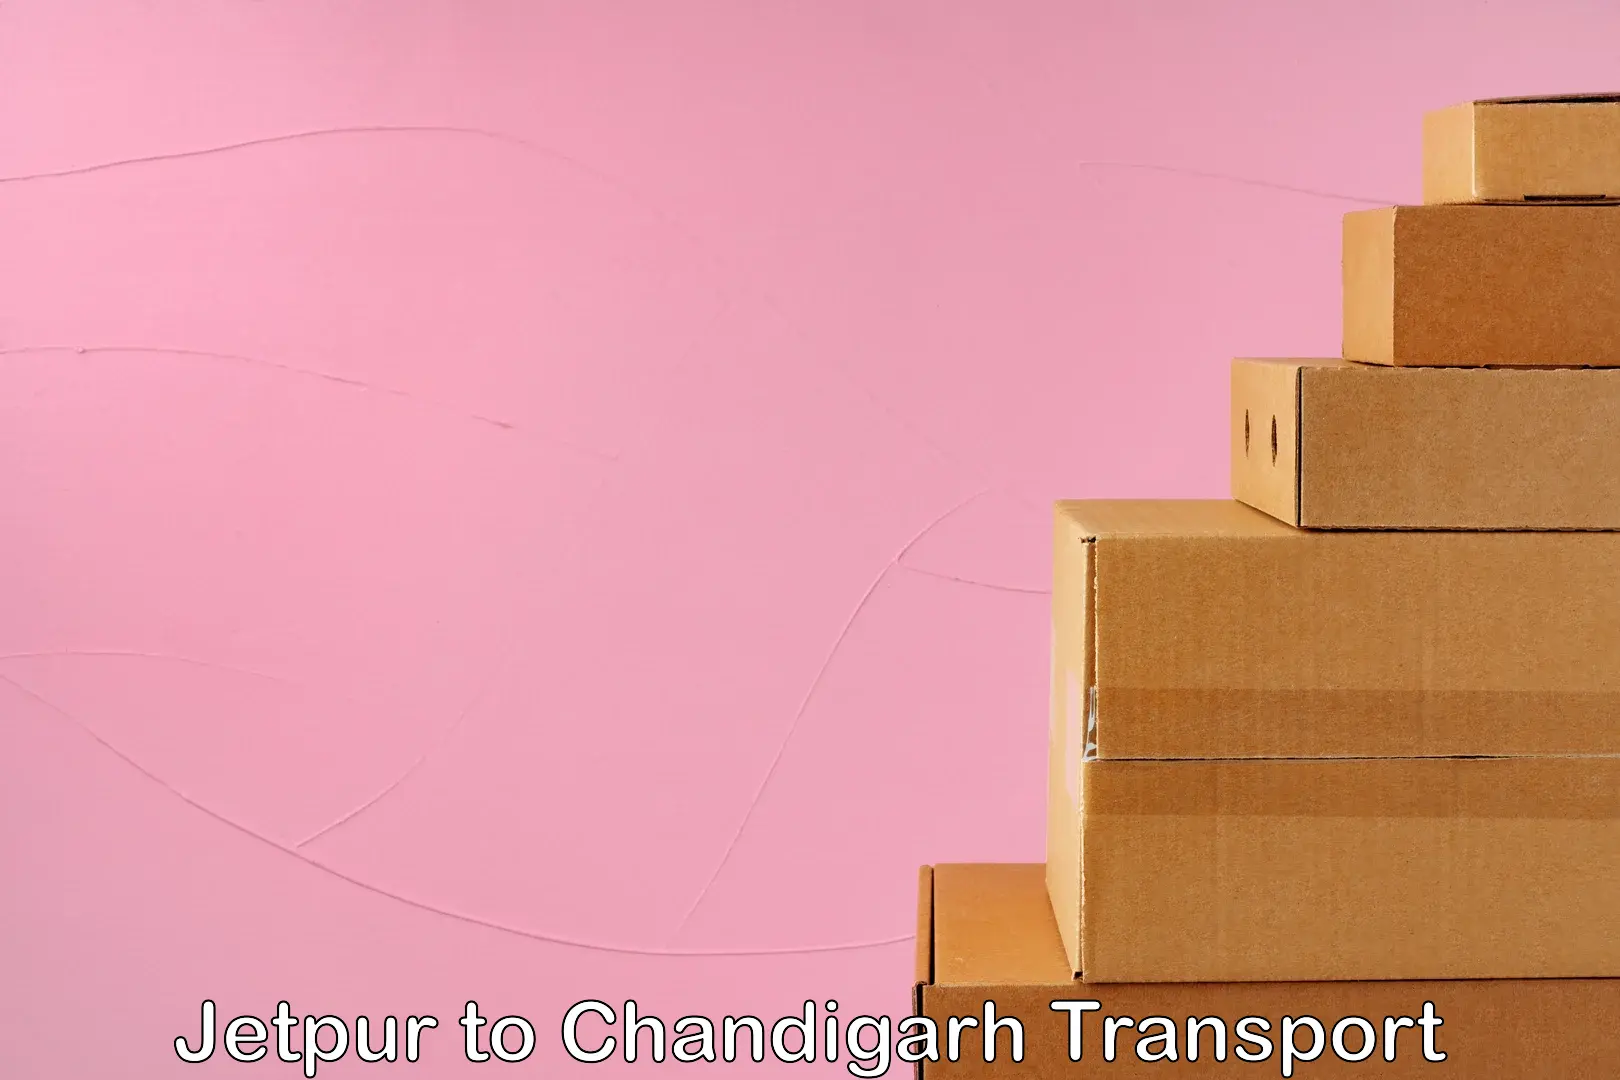 Express transport services Jetpur to Chandigarh